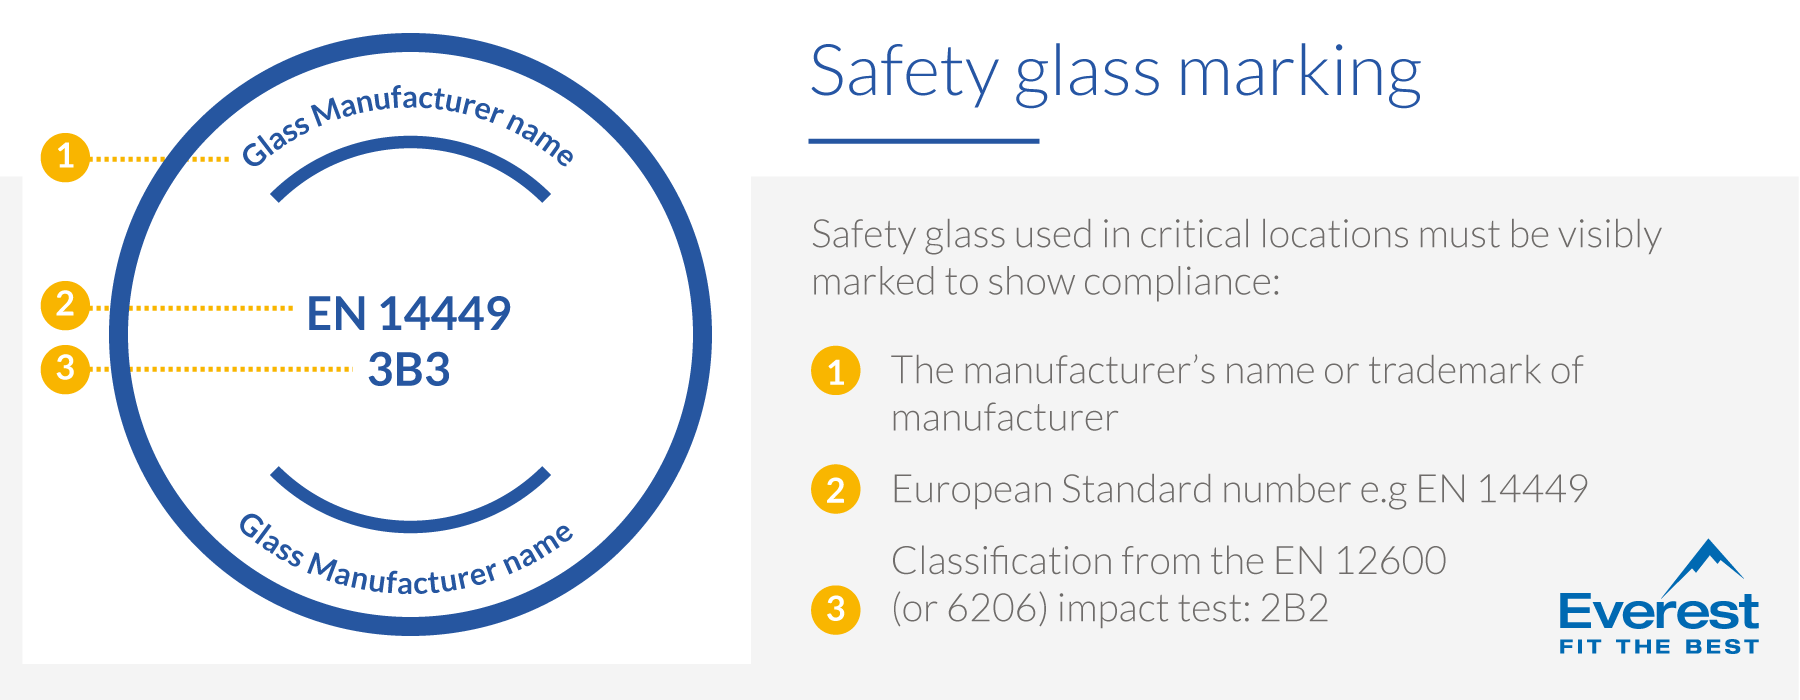 Safety glass marking